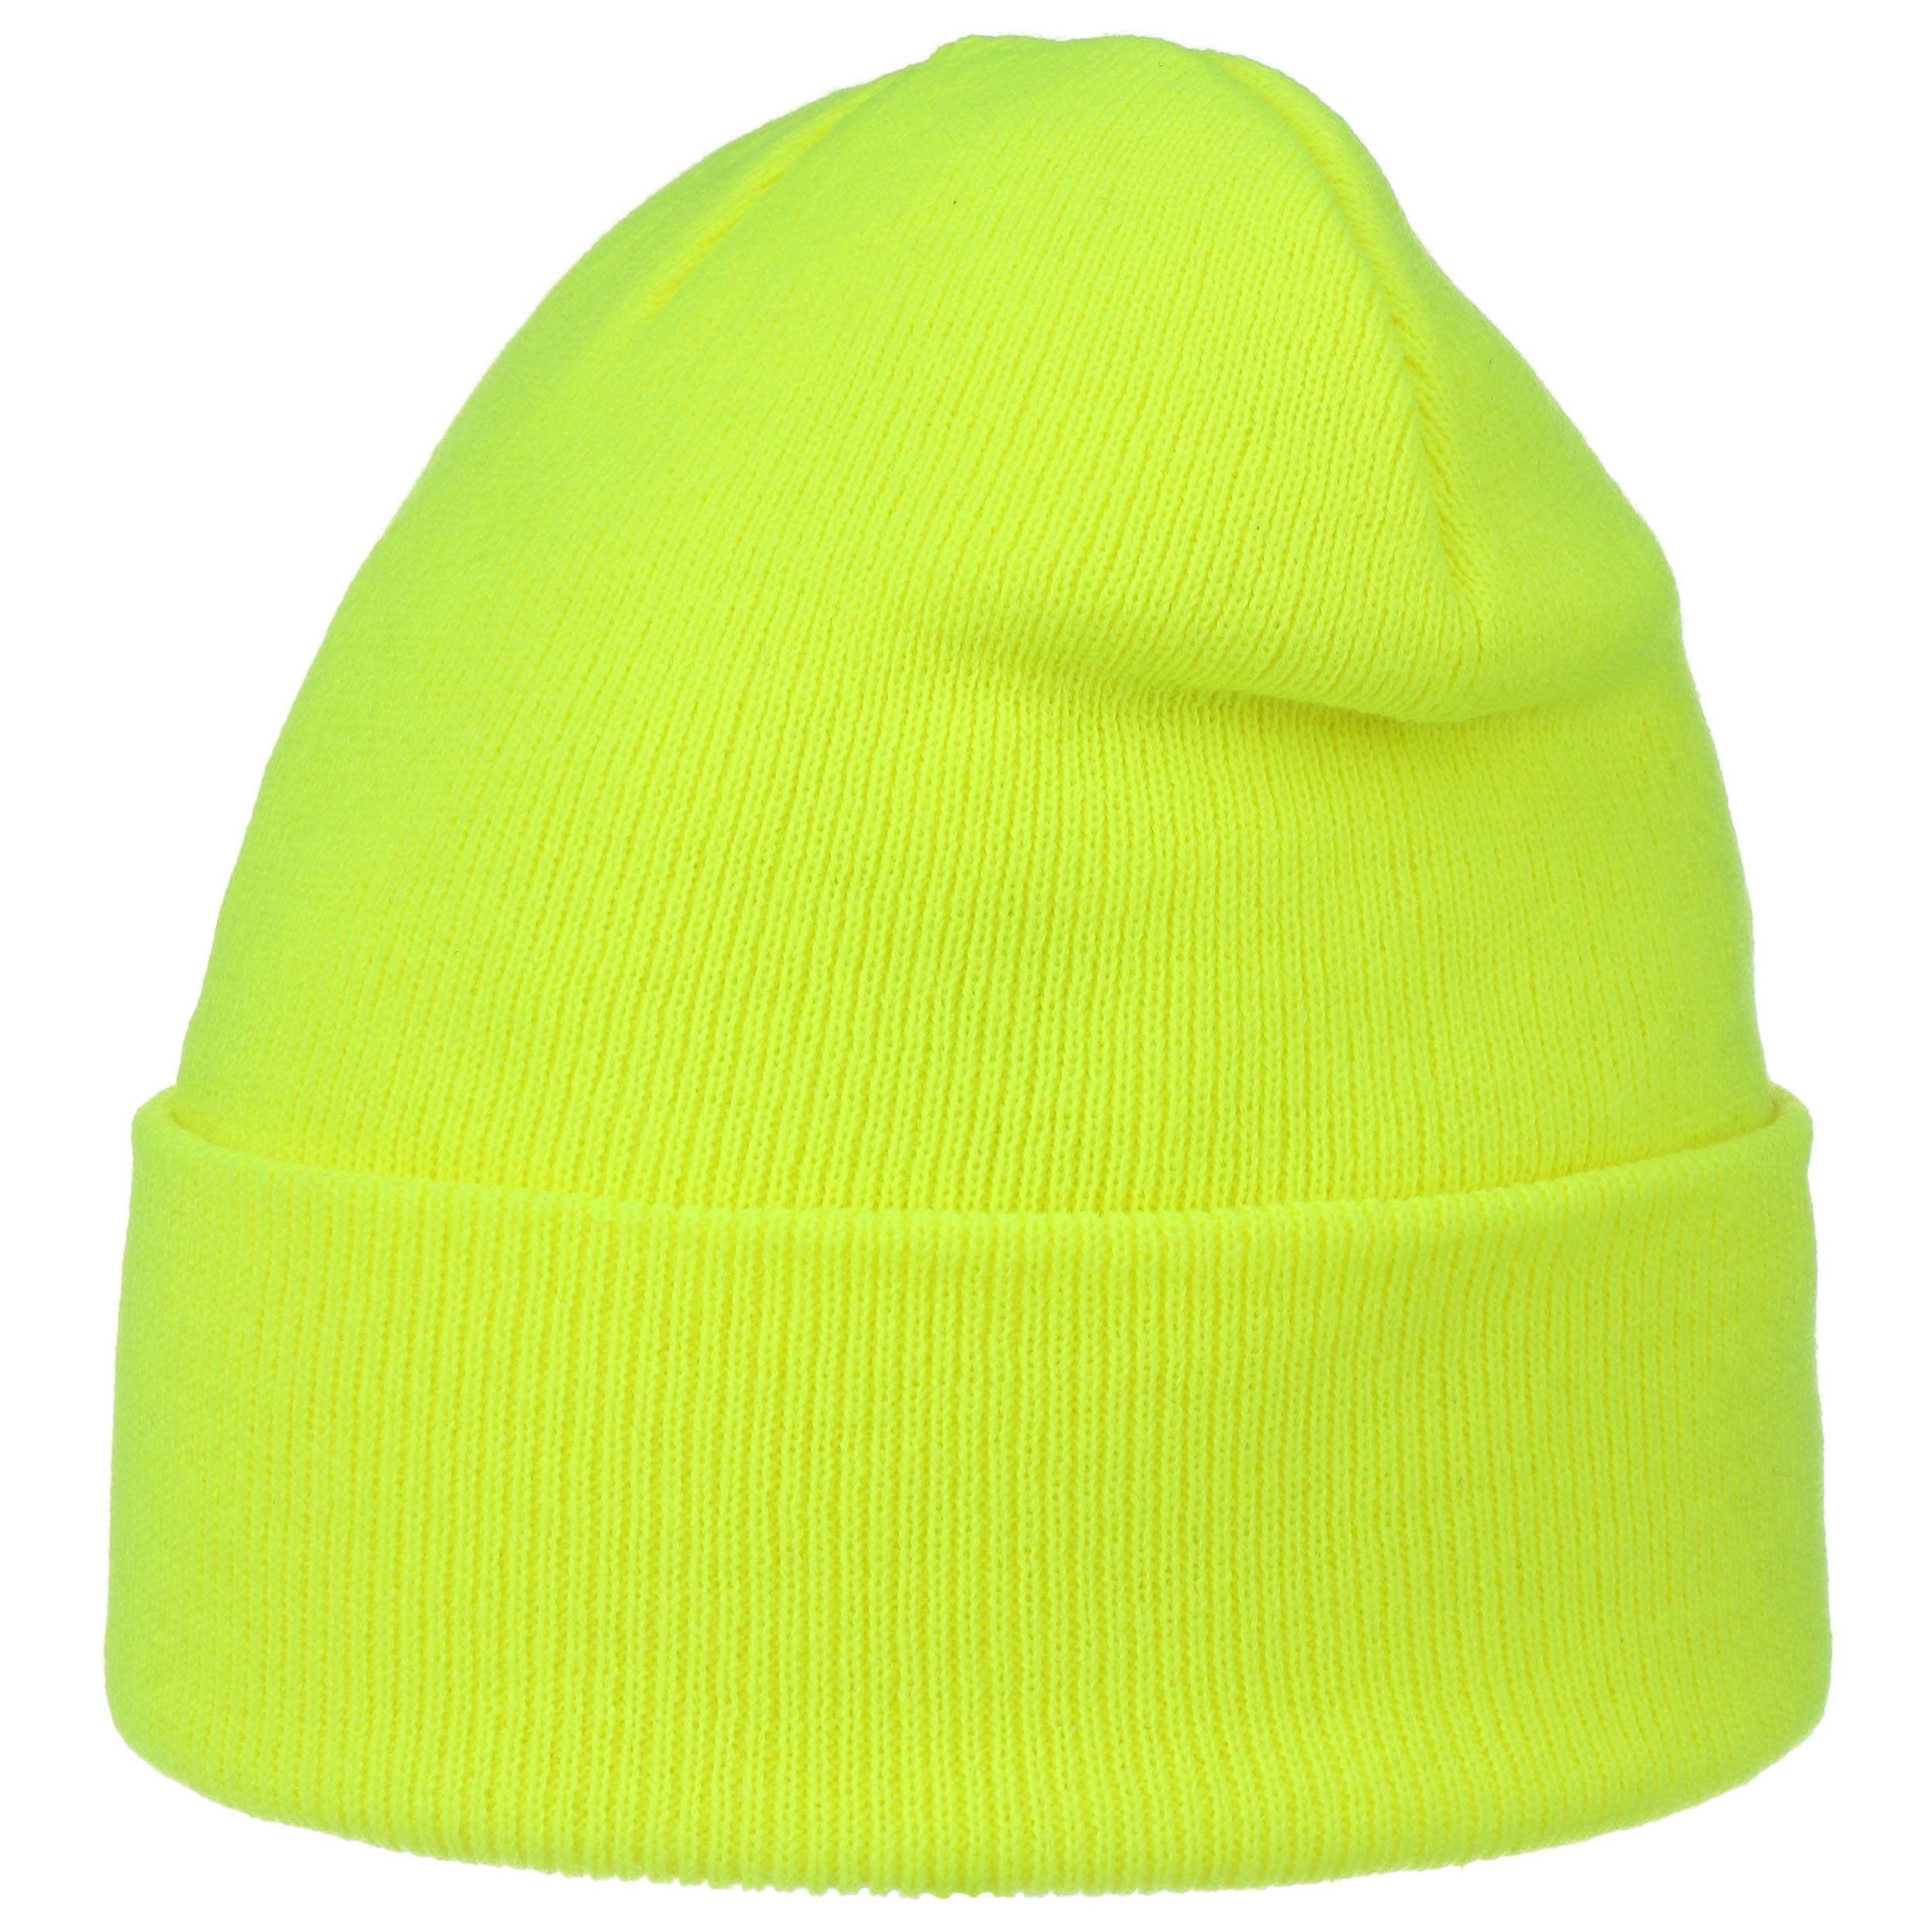 High Visibility Neon Color Cuff Long Winter Beanie Hat FREE SHIPPING 